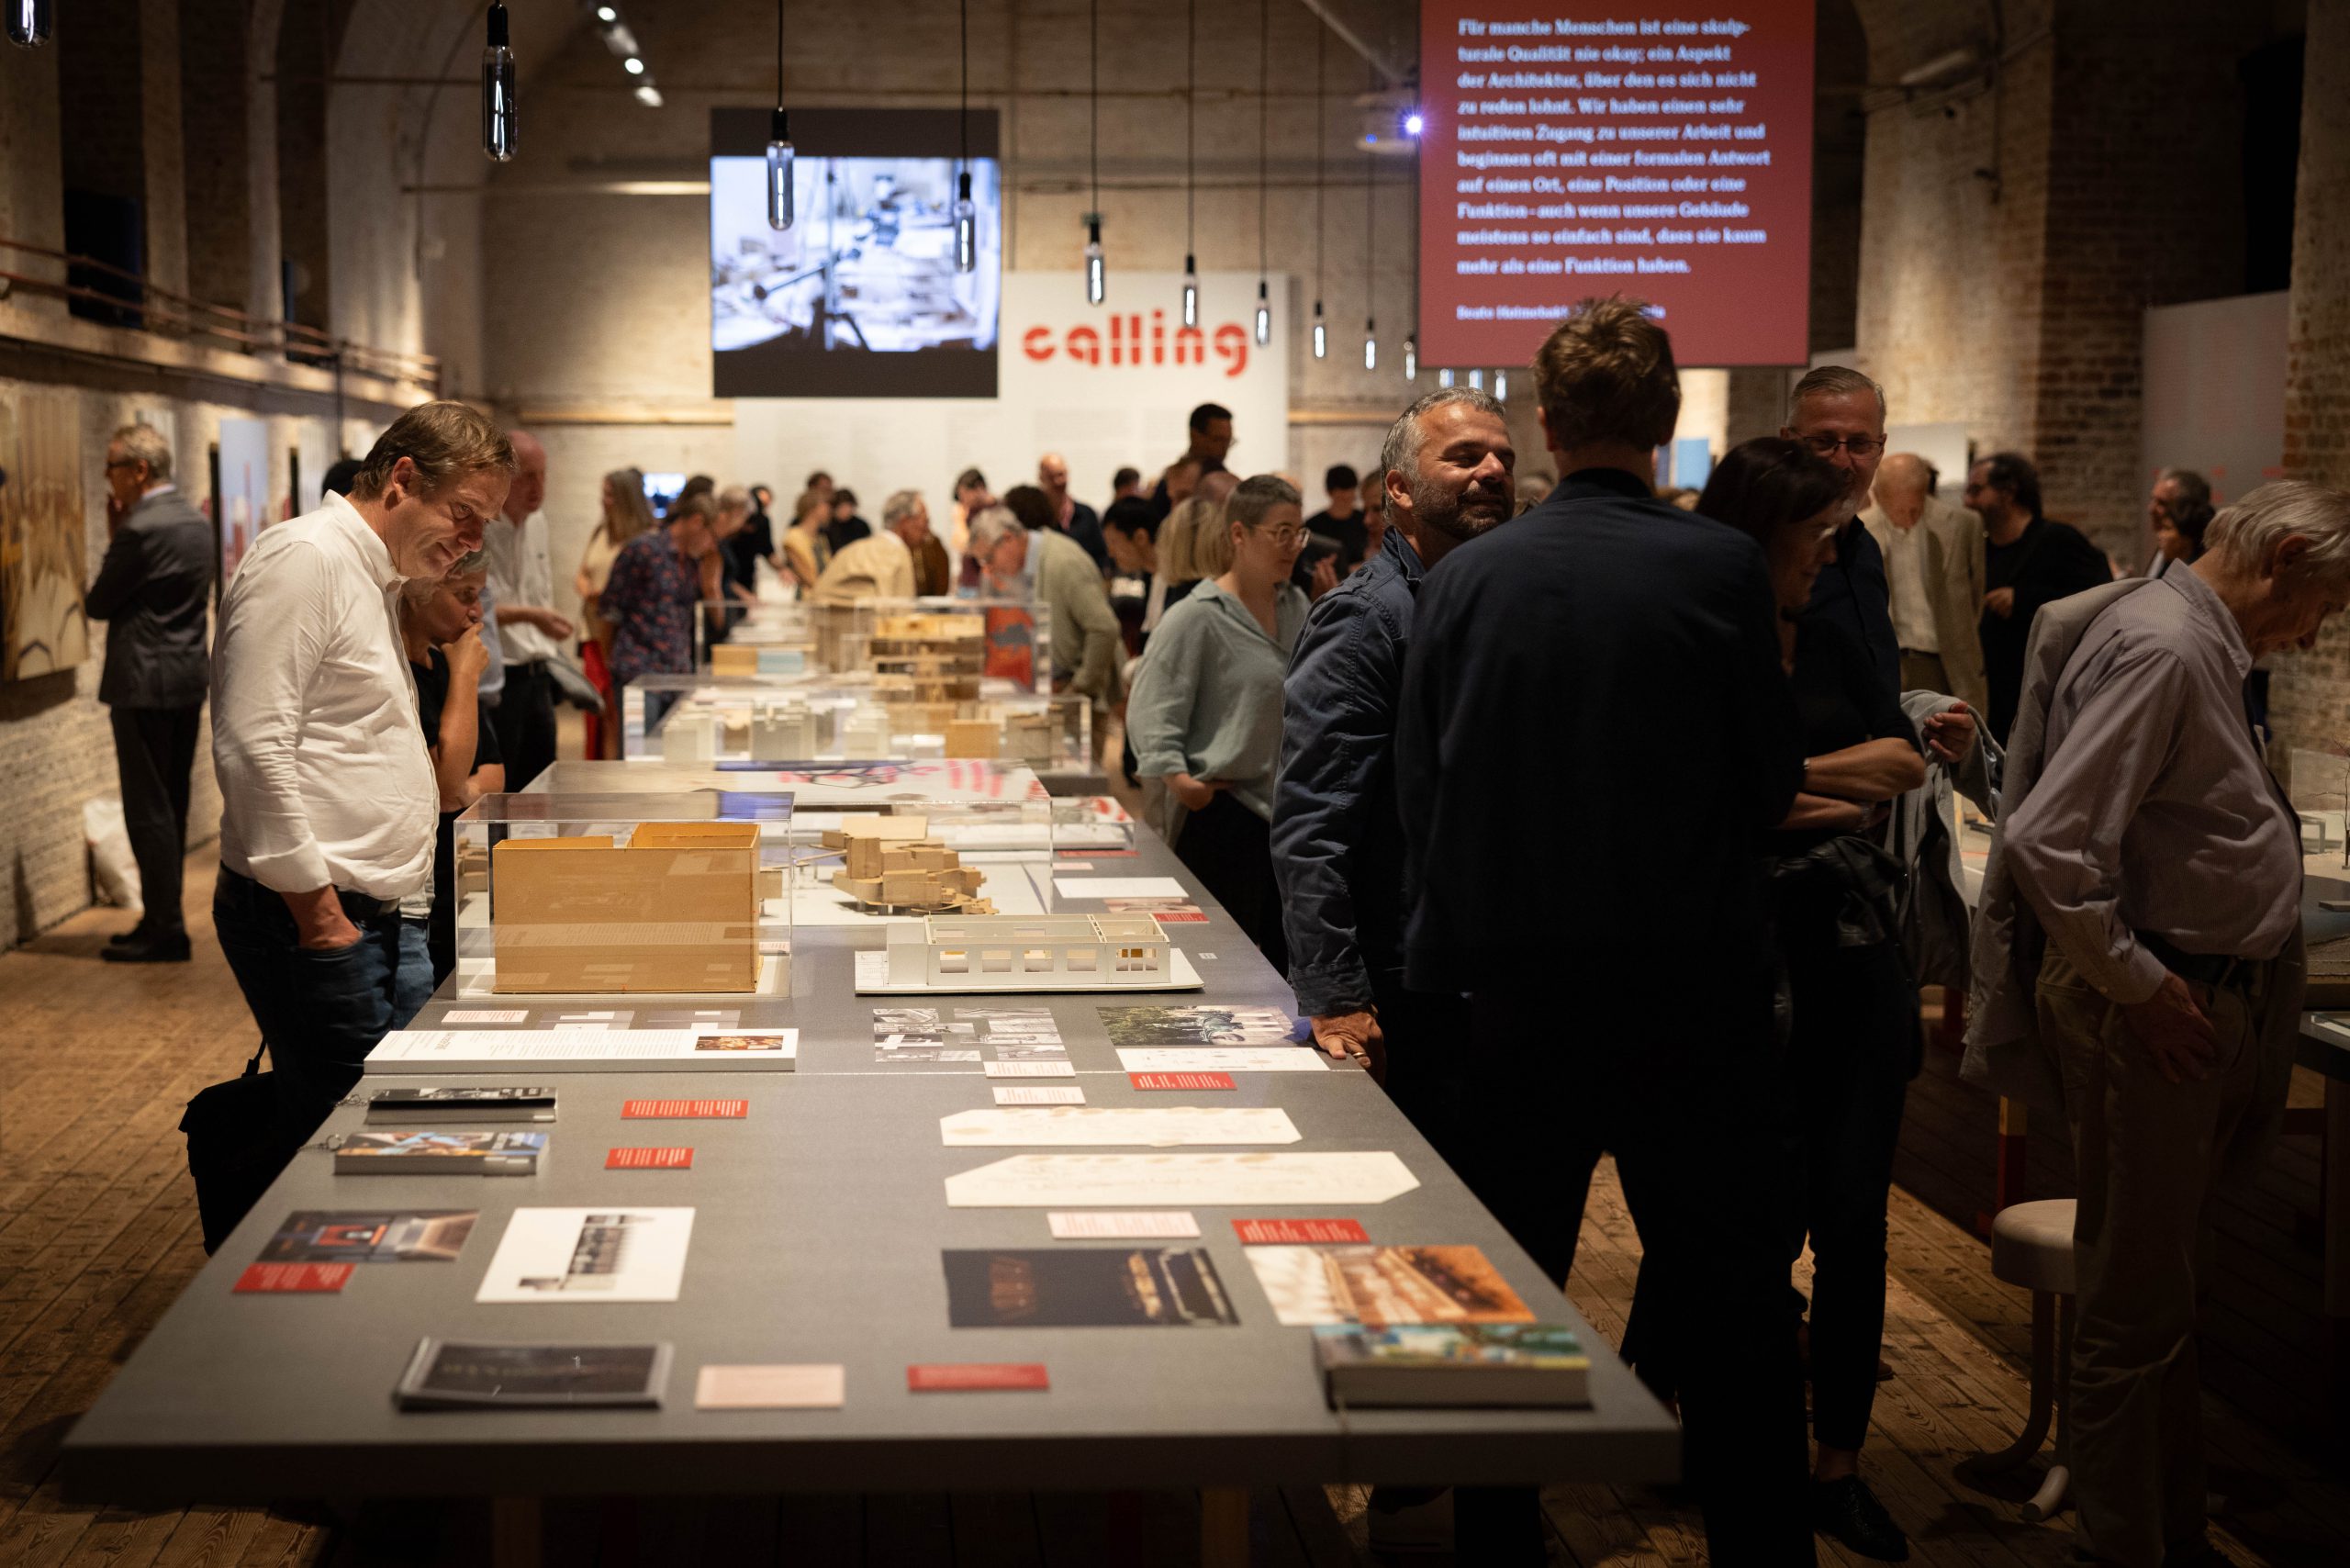 many people in an exhibition with large tables on which there are photos, books models